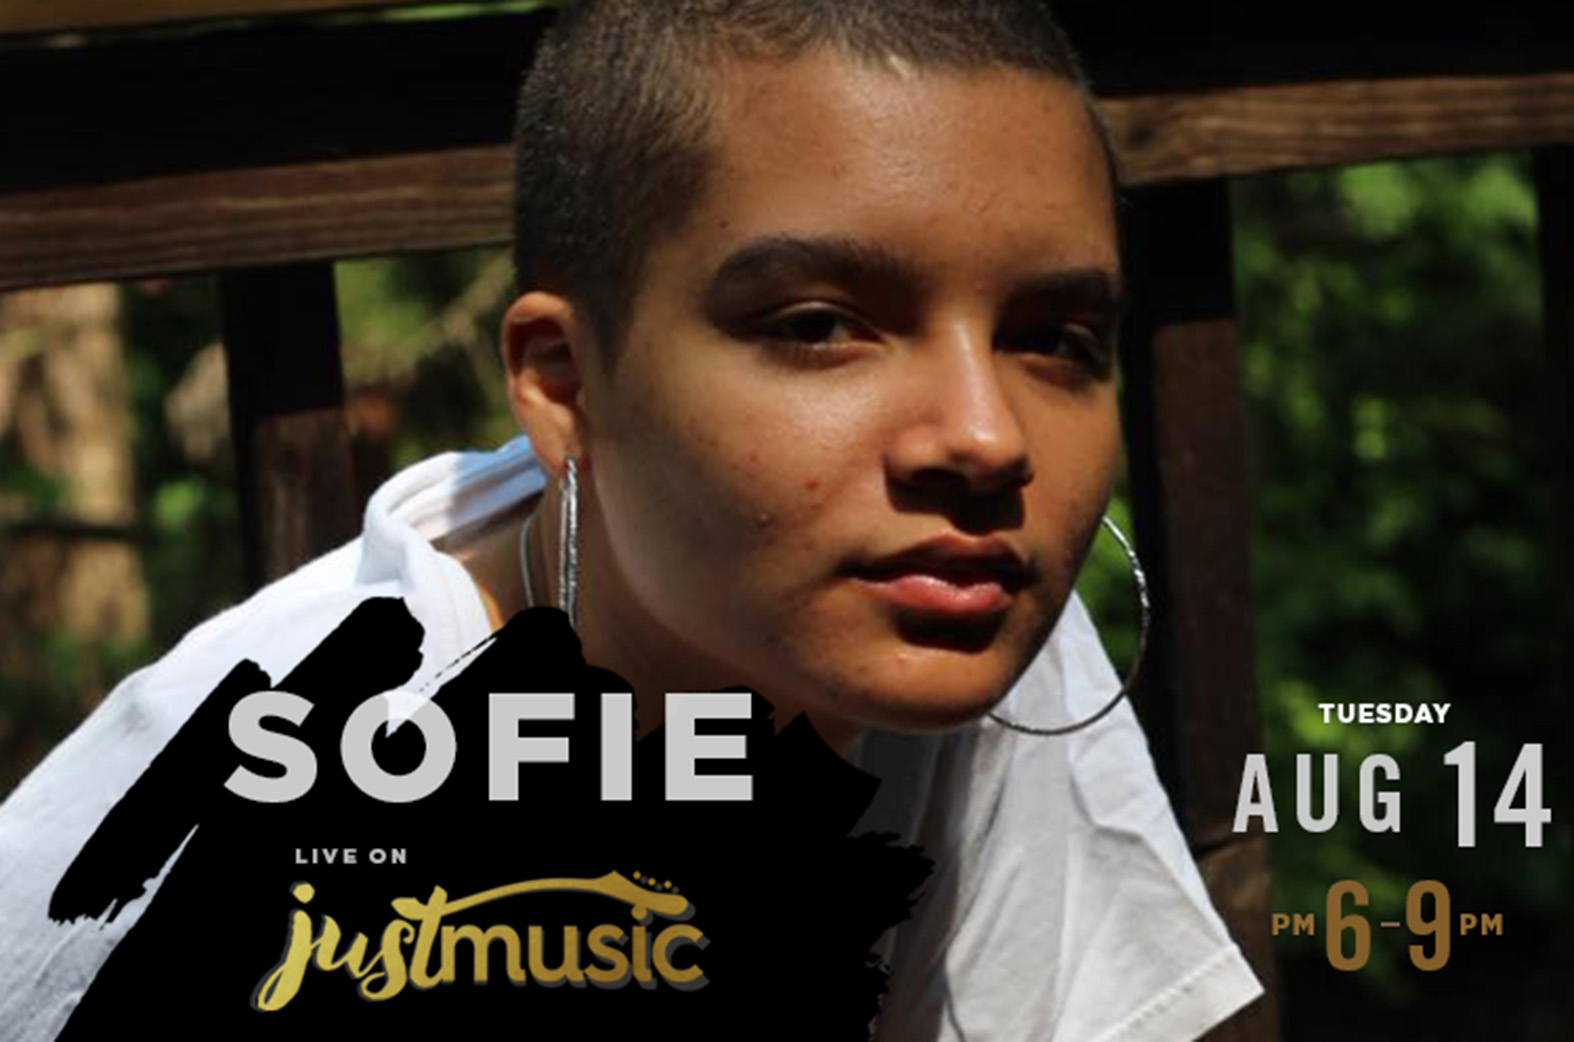 Meet Sofie, the artist with an acoustic, alternative vibe